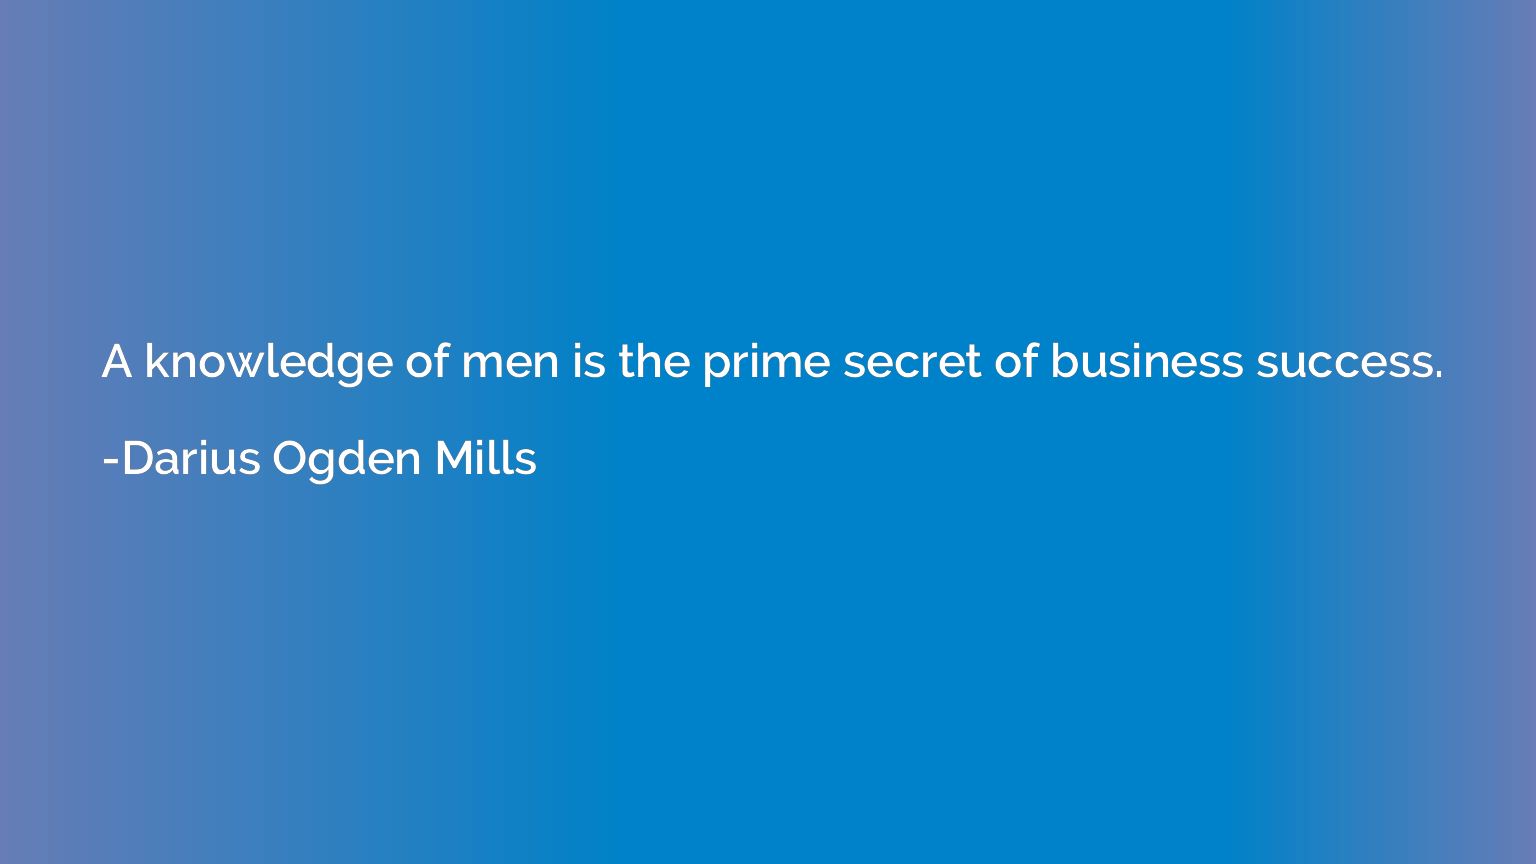 A knowledge of men is the prime secret of business success.